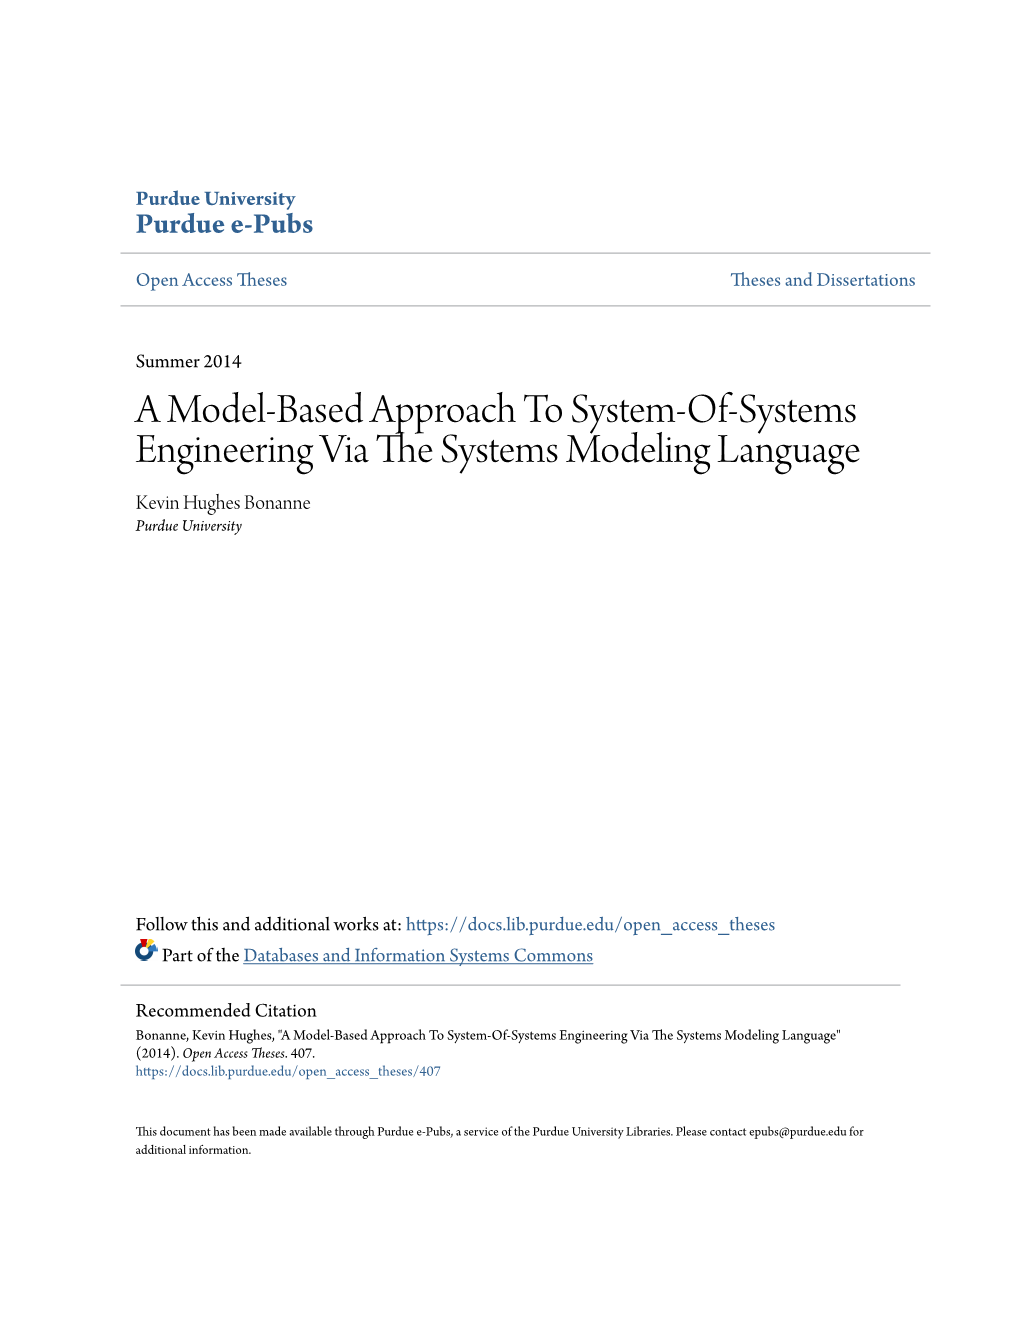 A Model-Based Approach to System-Of-Systems Engineering Via the Yss Tems Modeling Language Kevin Hughes Bonanne Purdue University